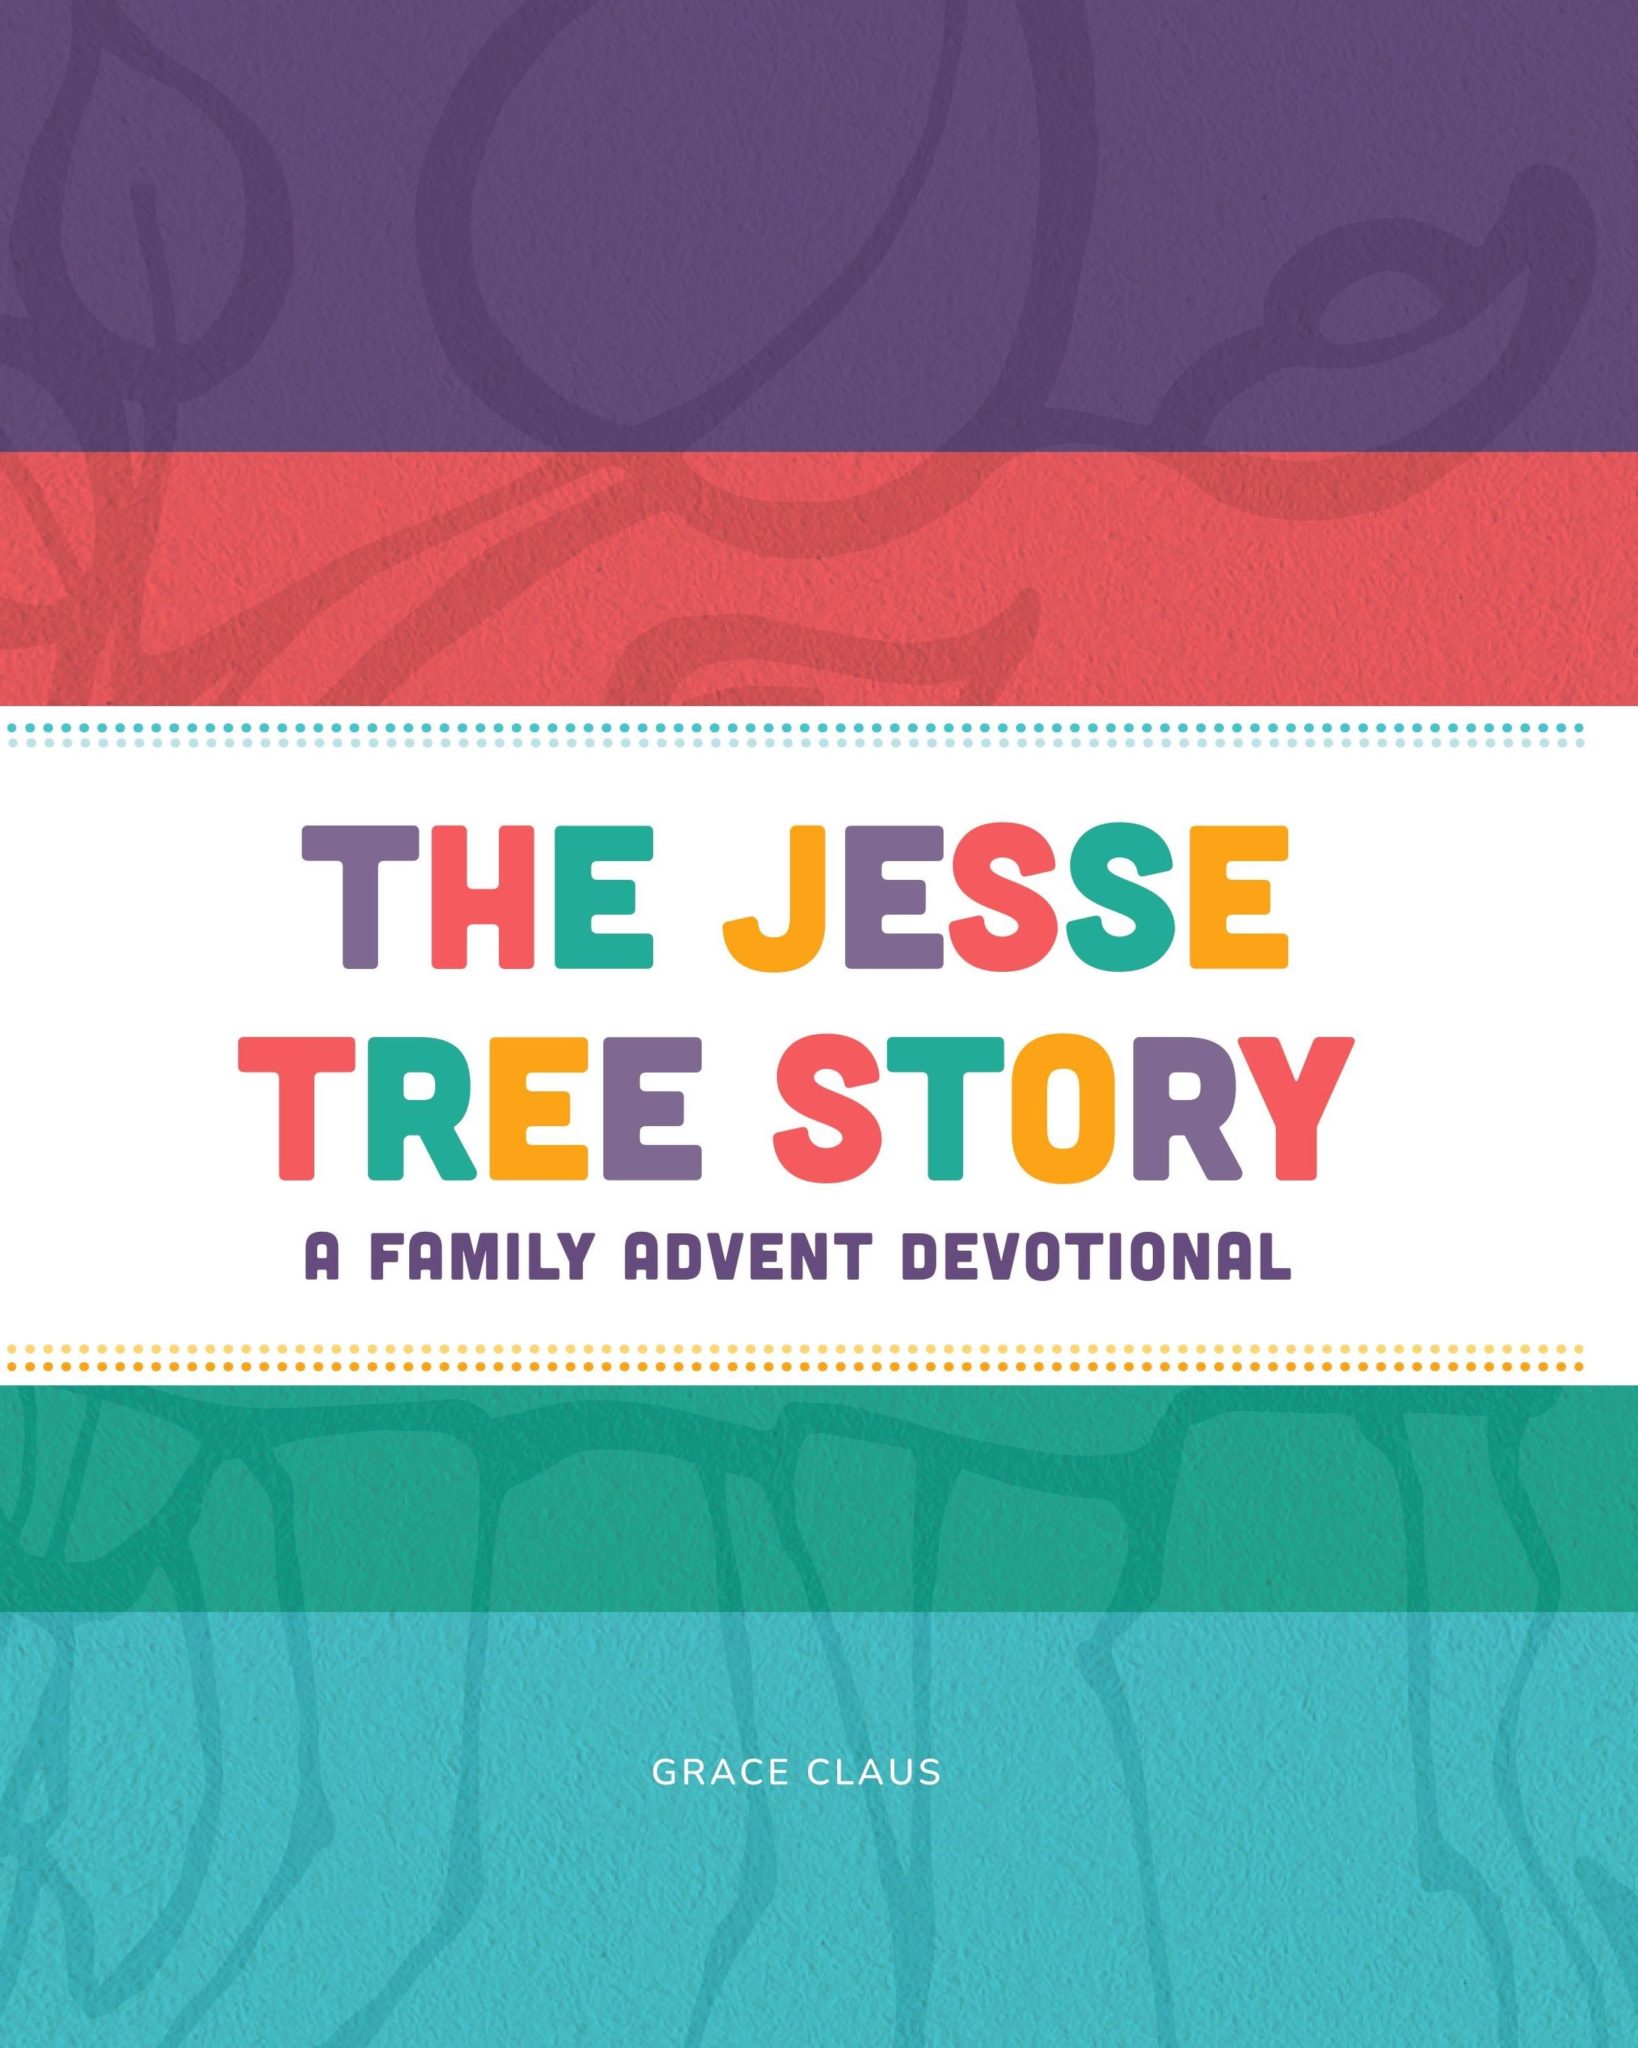 The Jesse Tree Story family advent devotional cover